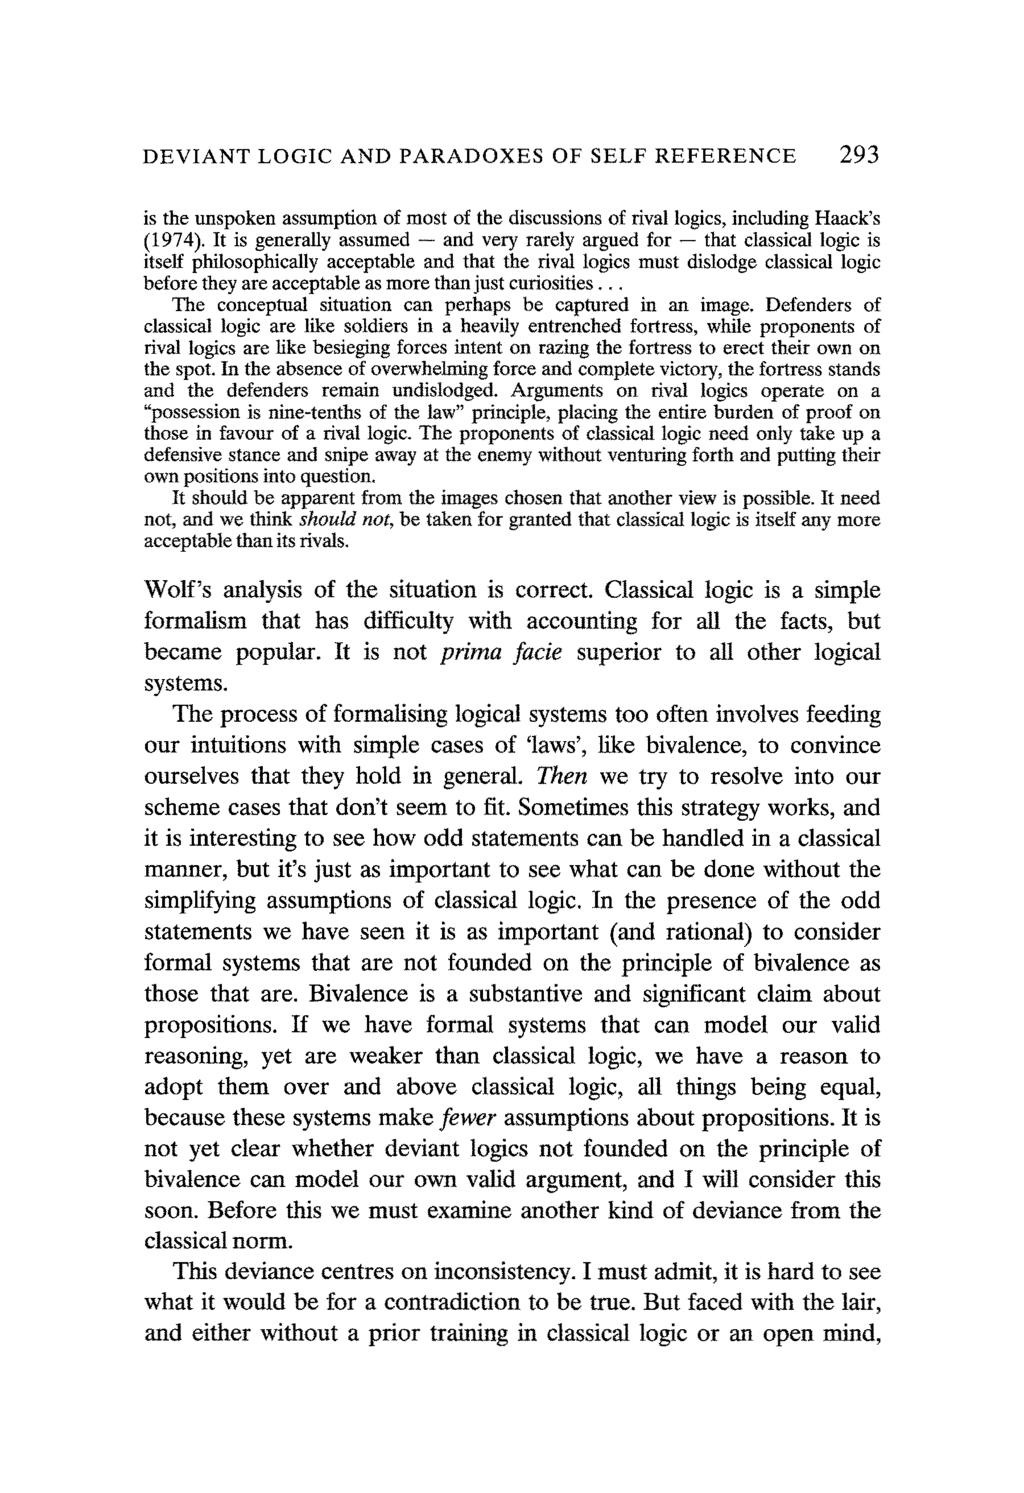 DEVIANT LOGIC AND PARADOXES OF SELF REFERENCE 293 is the tmspoken assumption of most of the discussions of rival logics, including Haack's (1974).